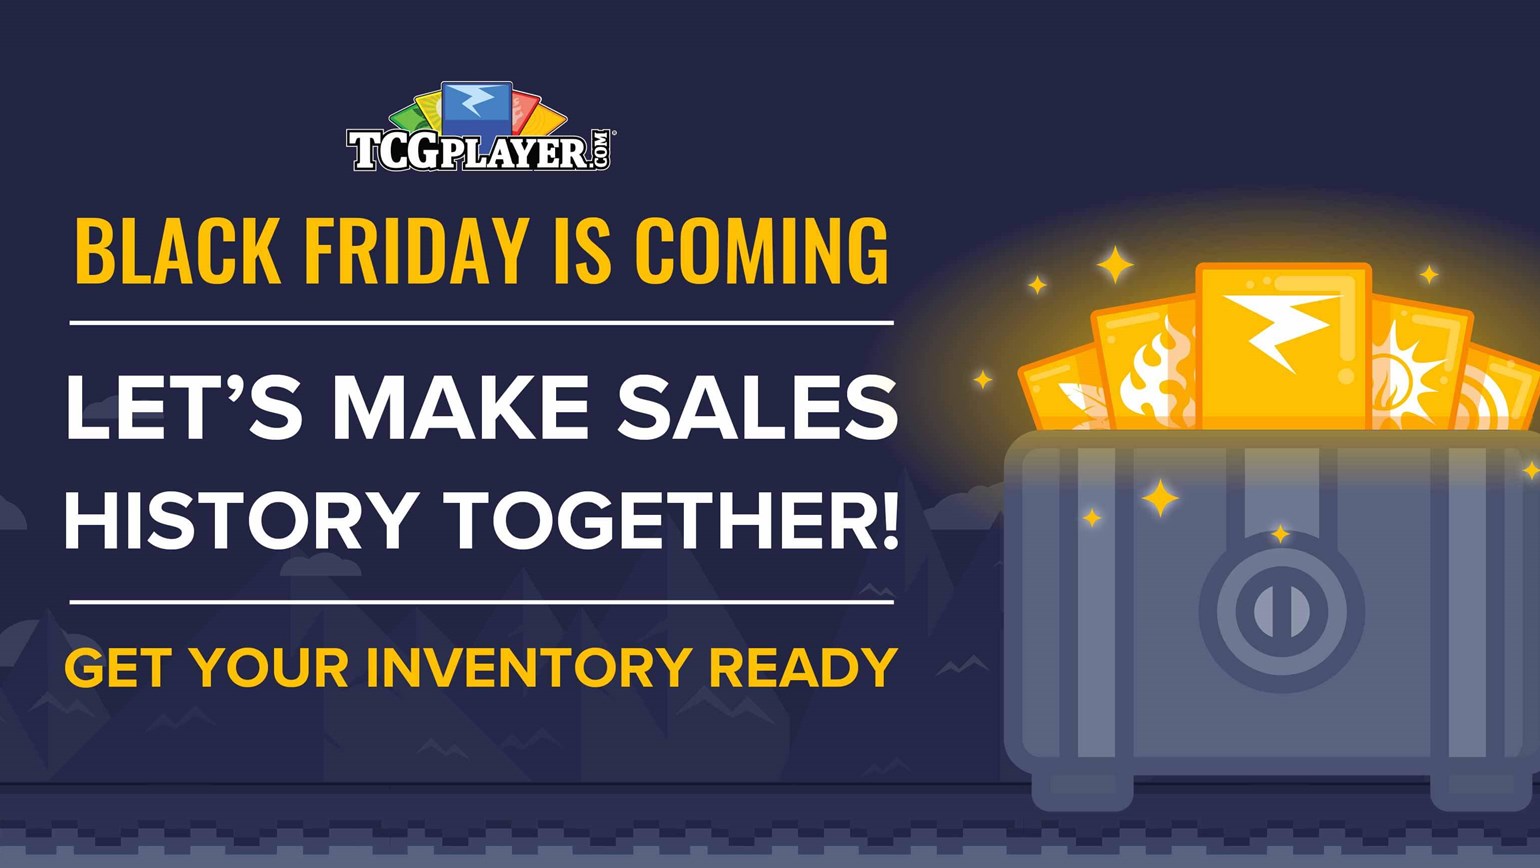 Get Ready to Set Sales Records This Black Friday—Add Inventory Now!